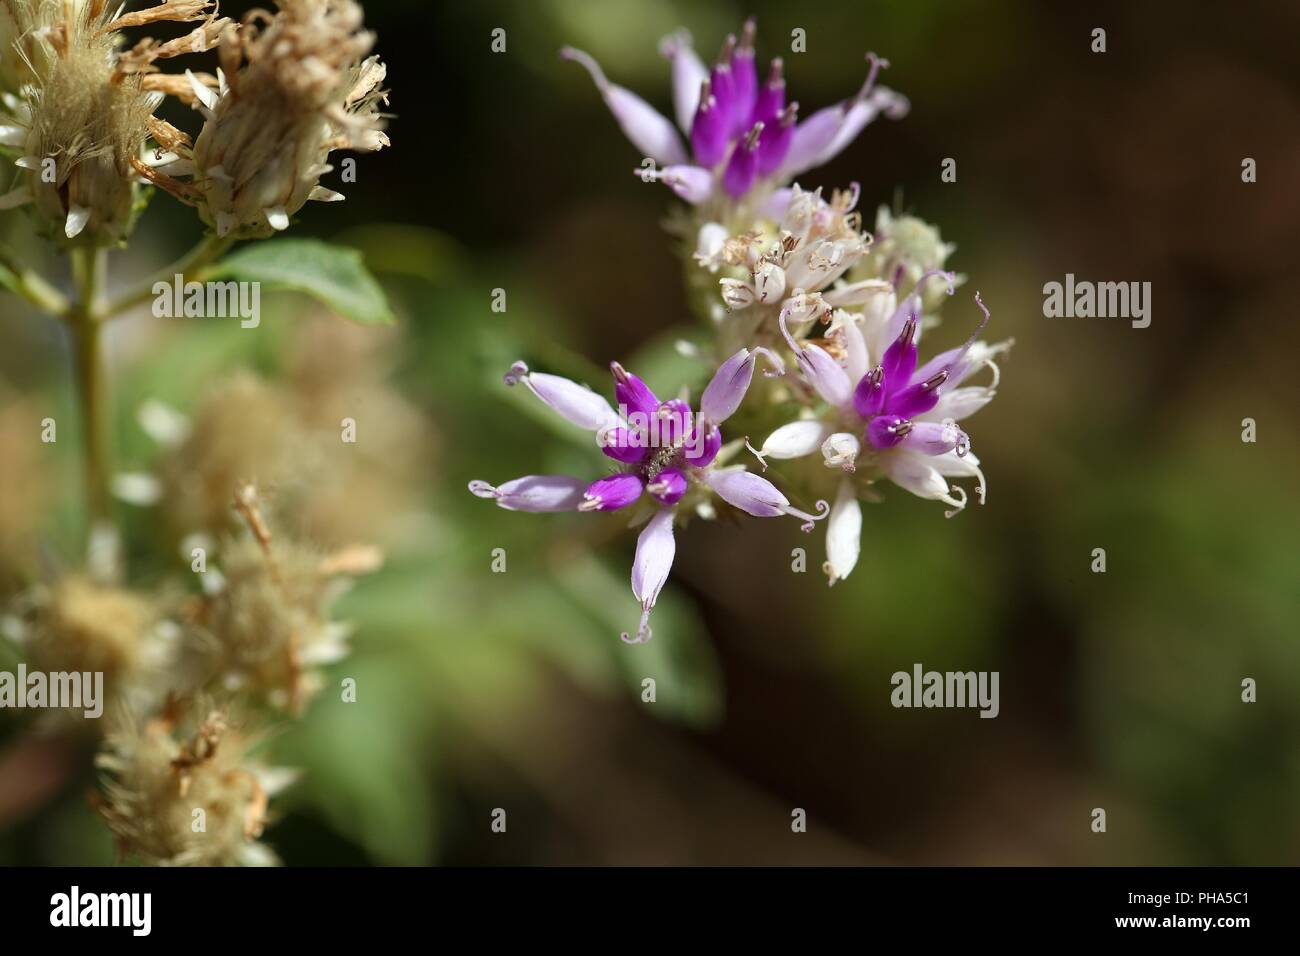 Flower of a succulent plant in Ethiopia Stock Photo